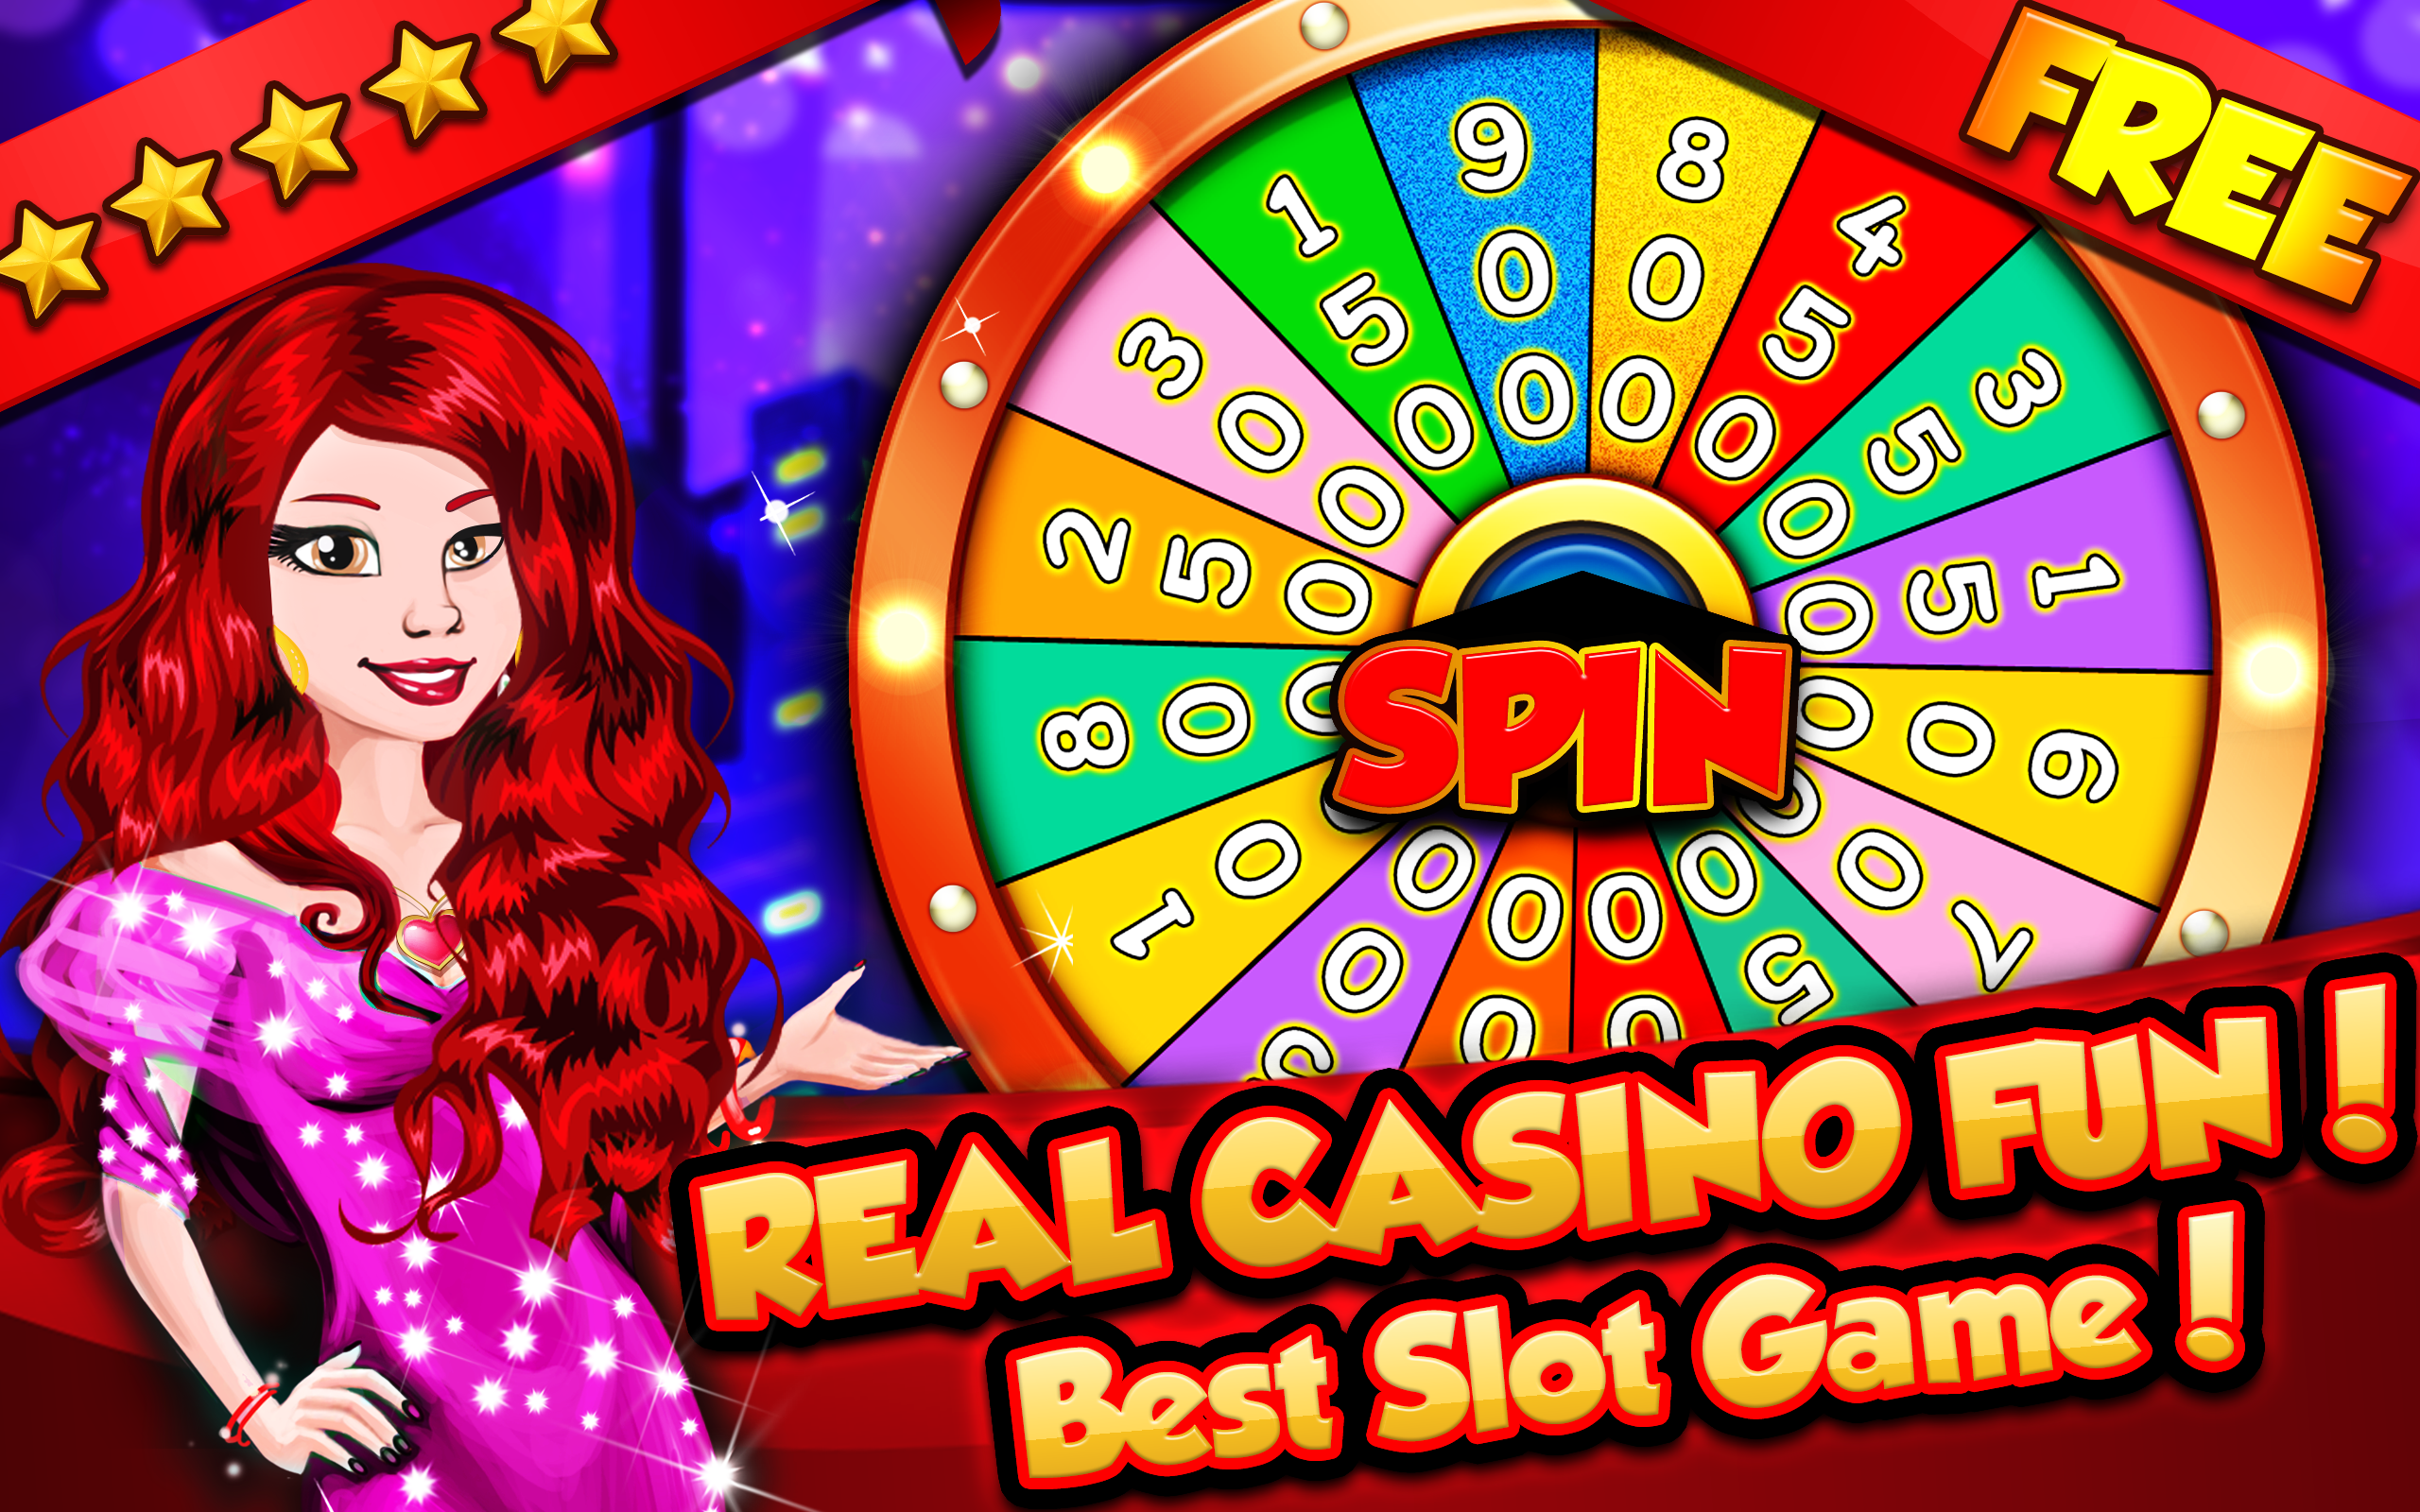 Free casino slots no download required